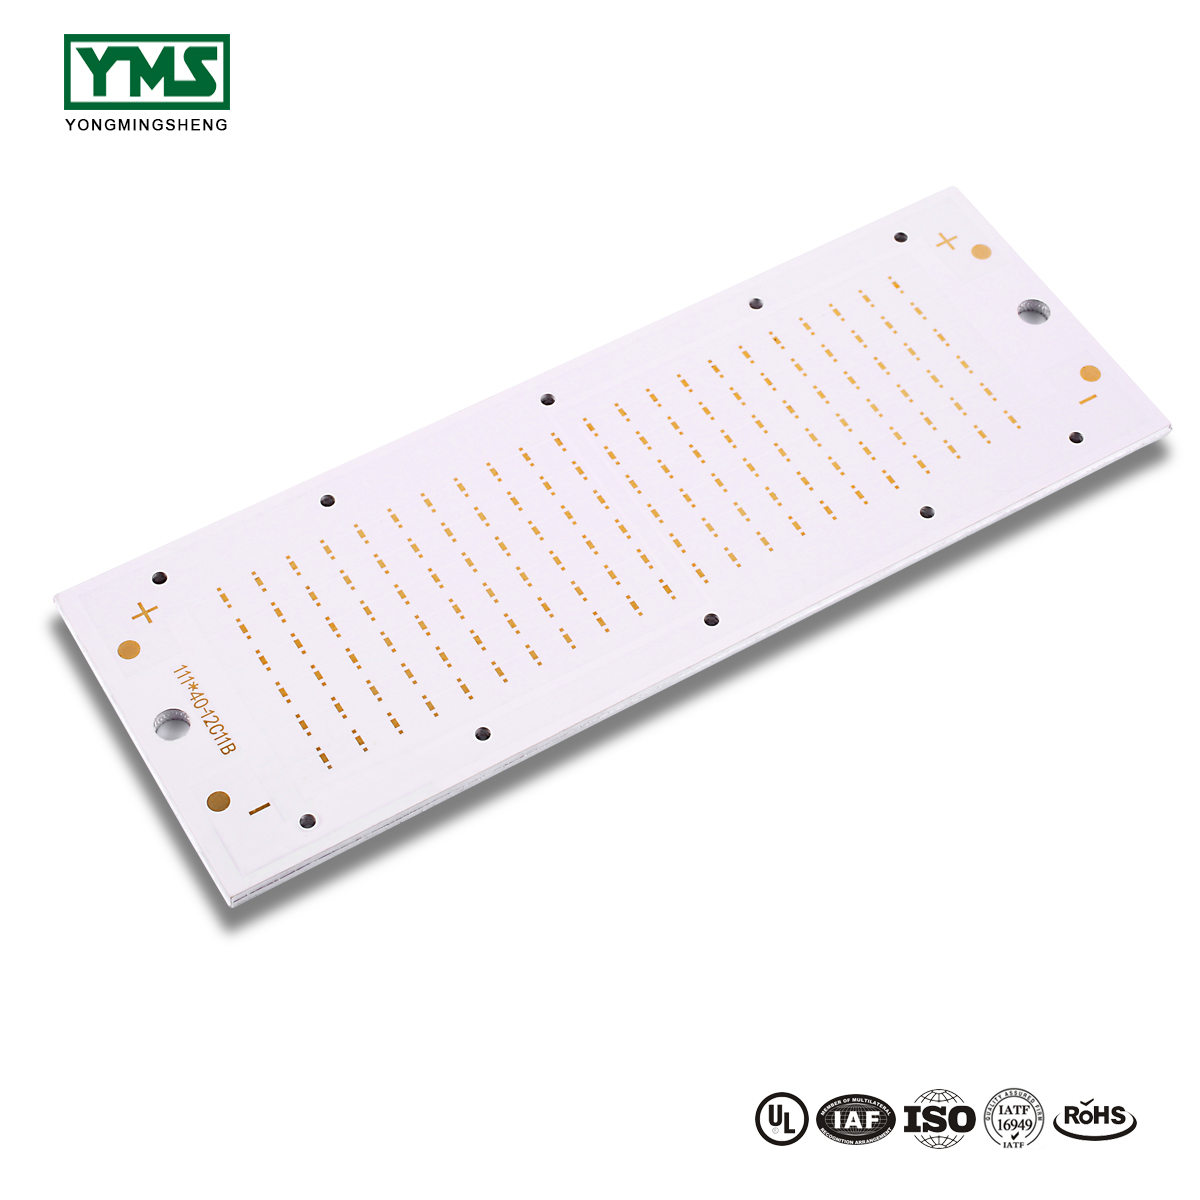 Factory made hot-sale Rigid-Flex And Flexible Pcb - 1Layer Aluminum base Board | YMSPCB – Yongmingsheng